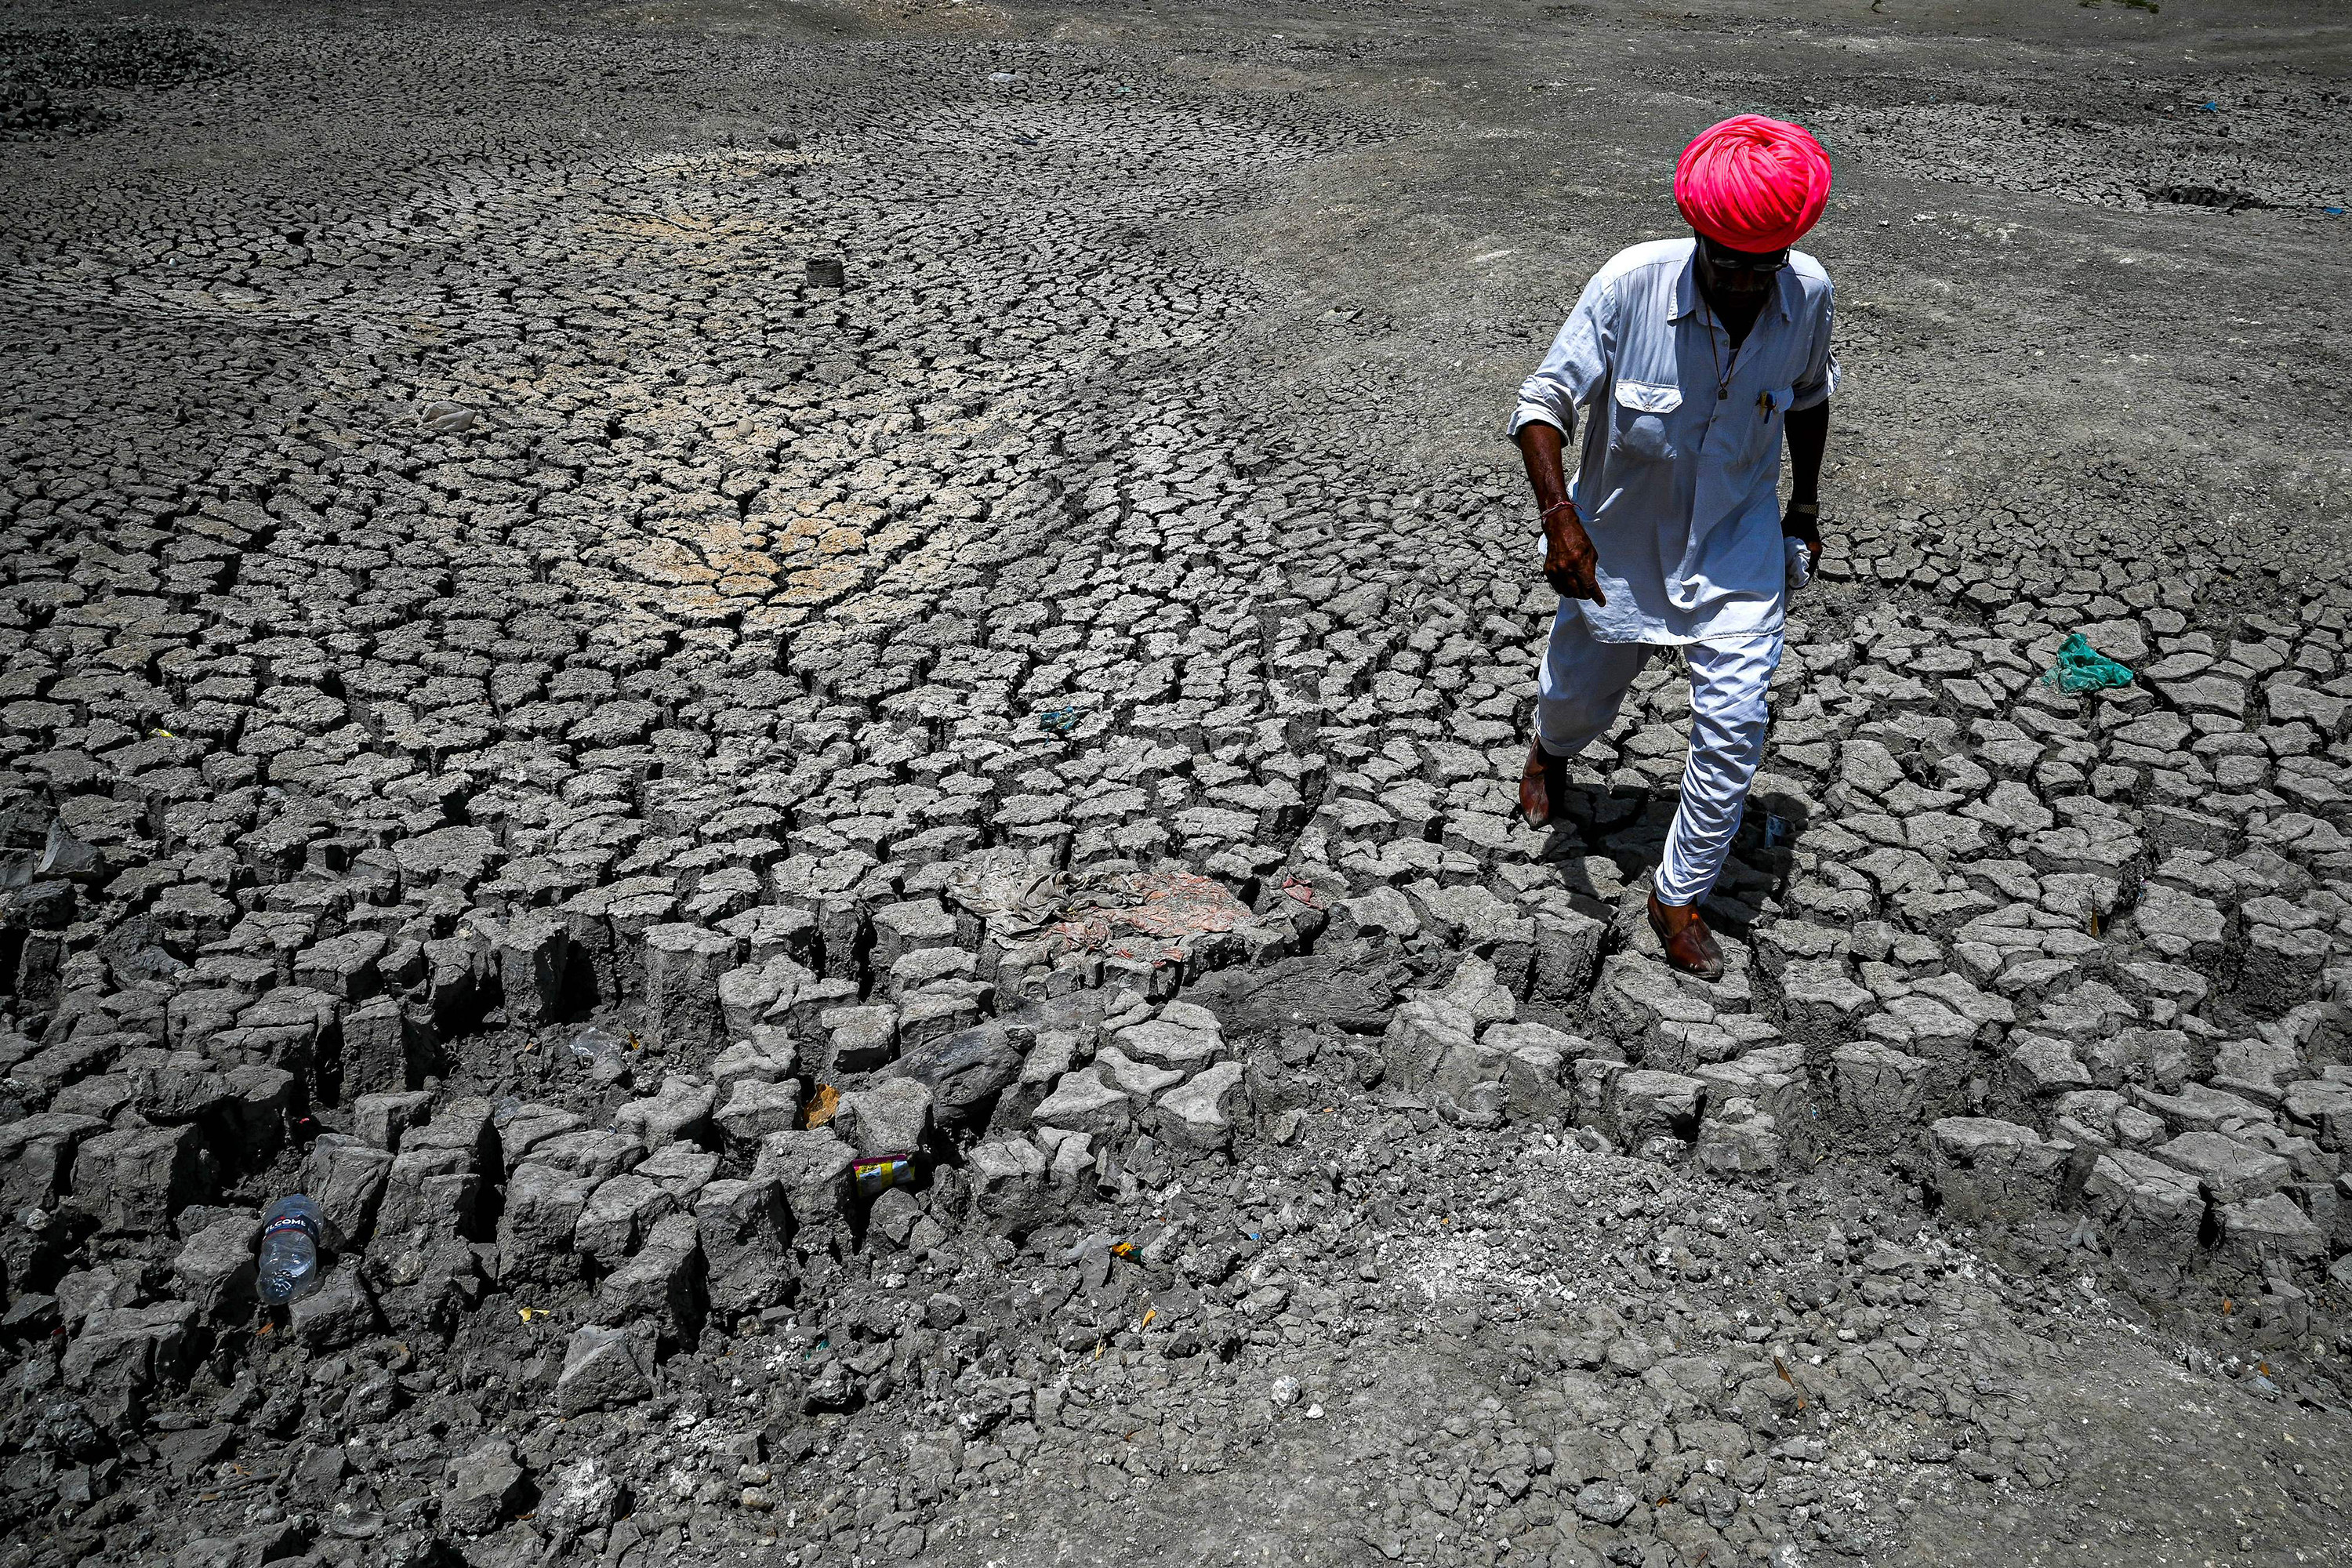 A villager walks through the cracked bottom of a dried-out pond on a hot summer day in India’s desert state of Rajasthan. Photo: AFP via Getty Images